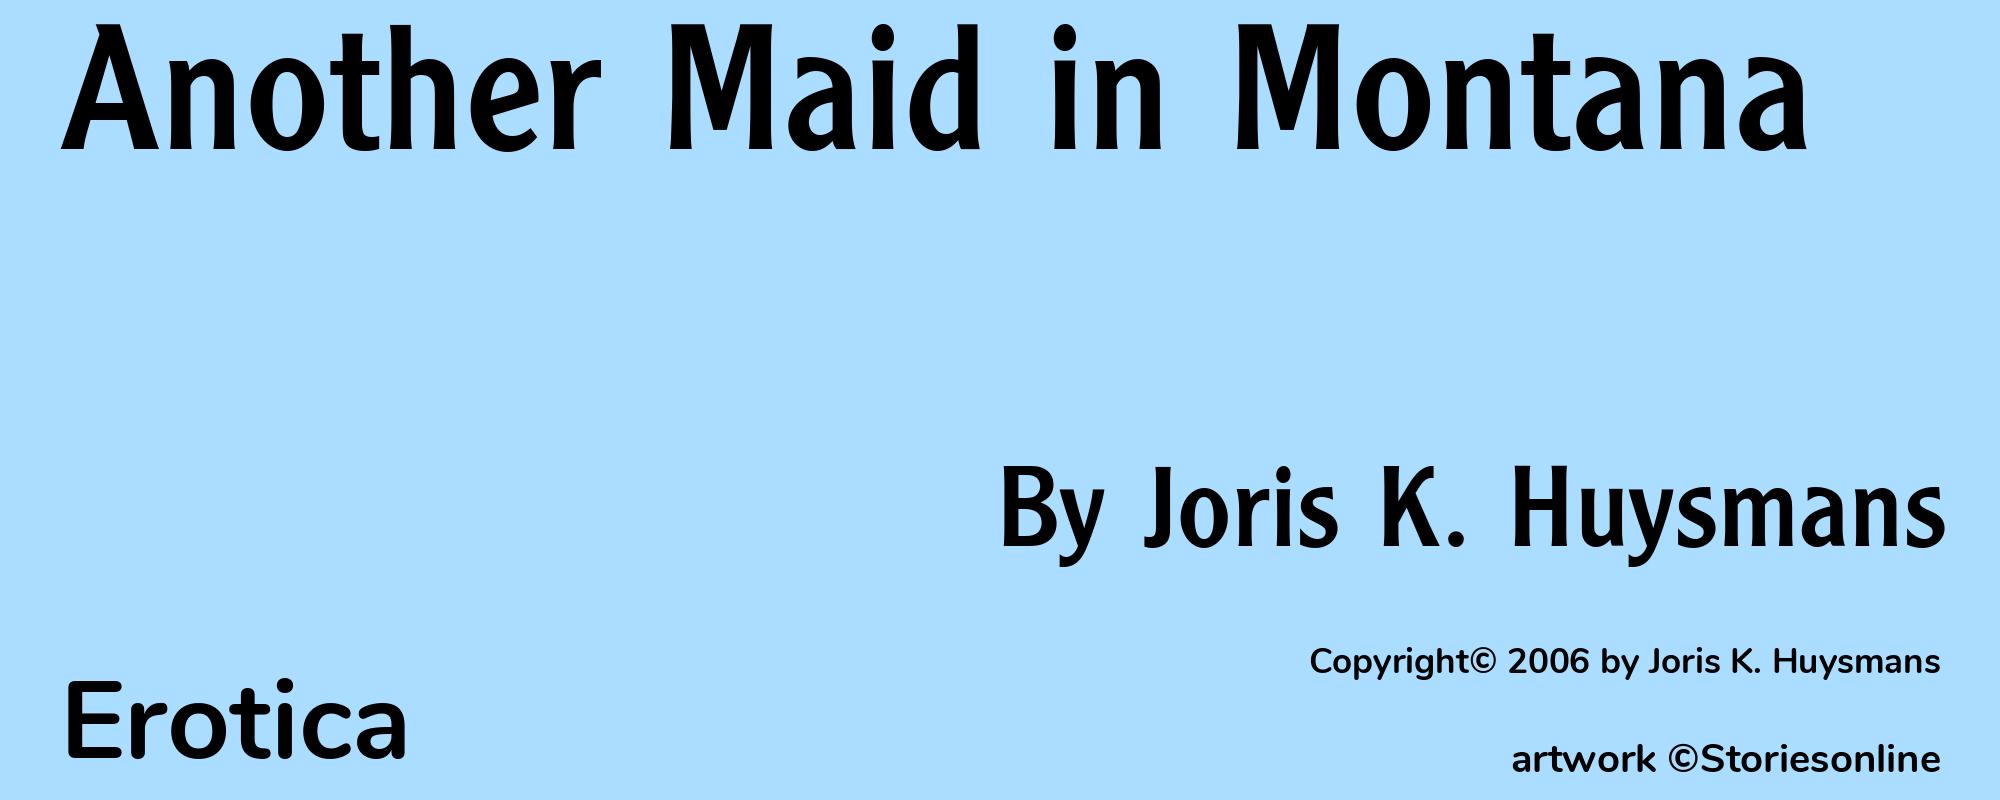 Another Maid in Montana - Cover